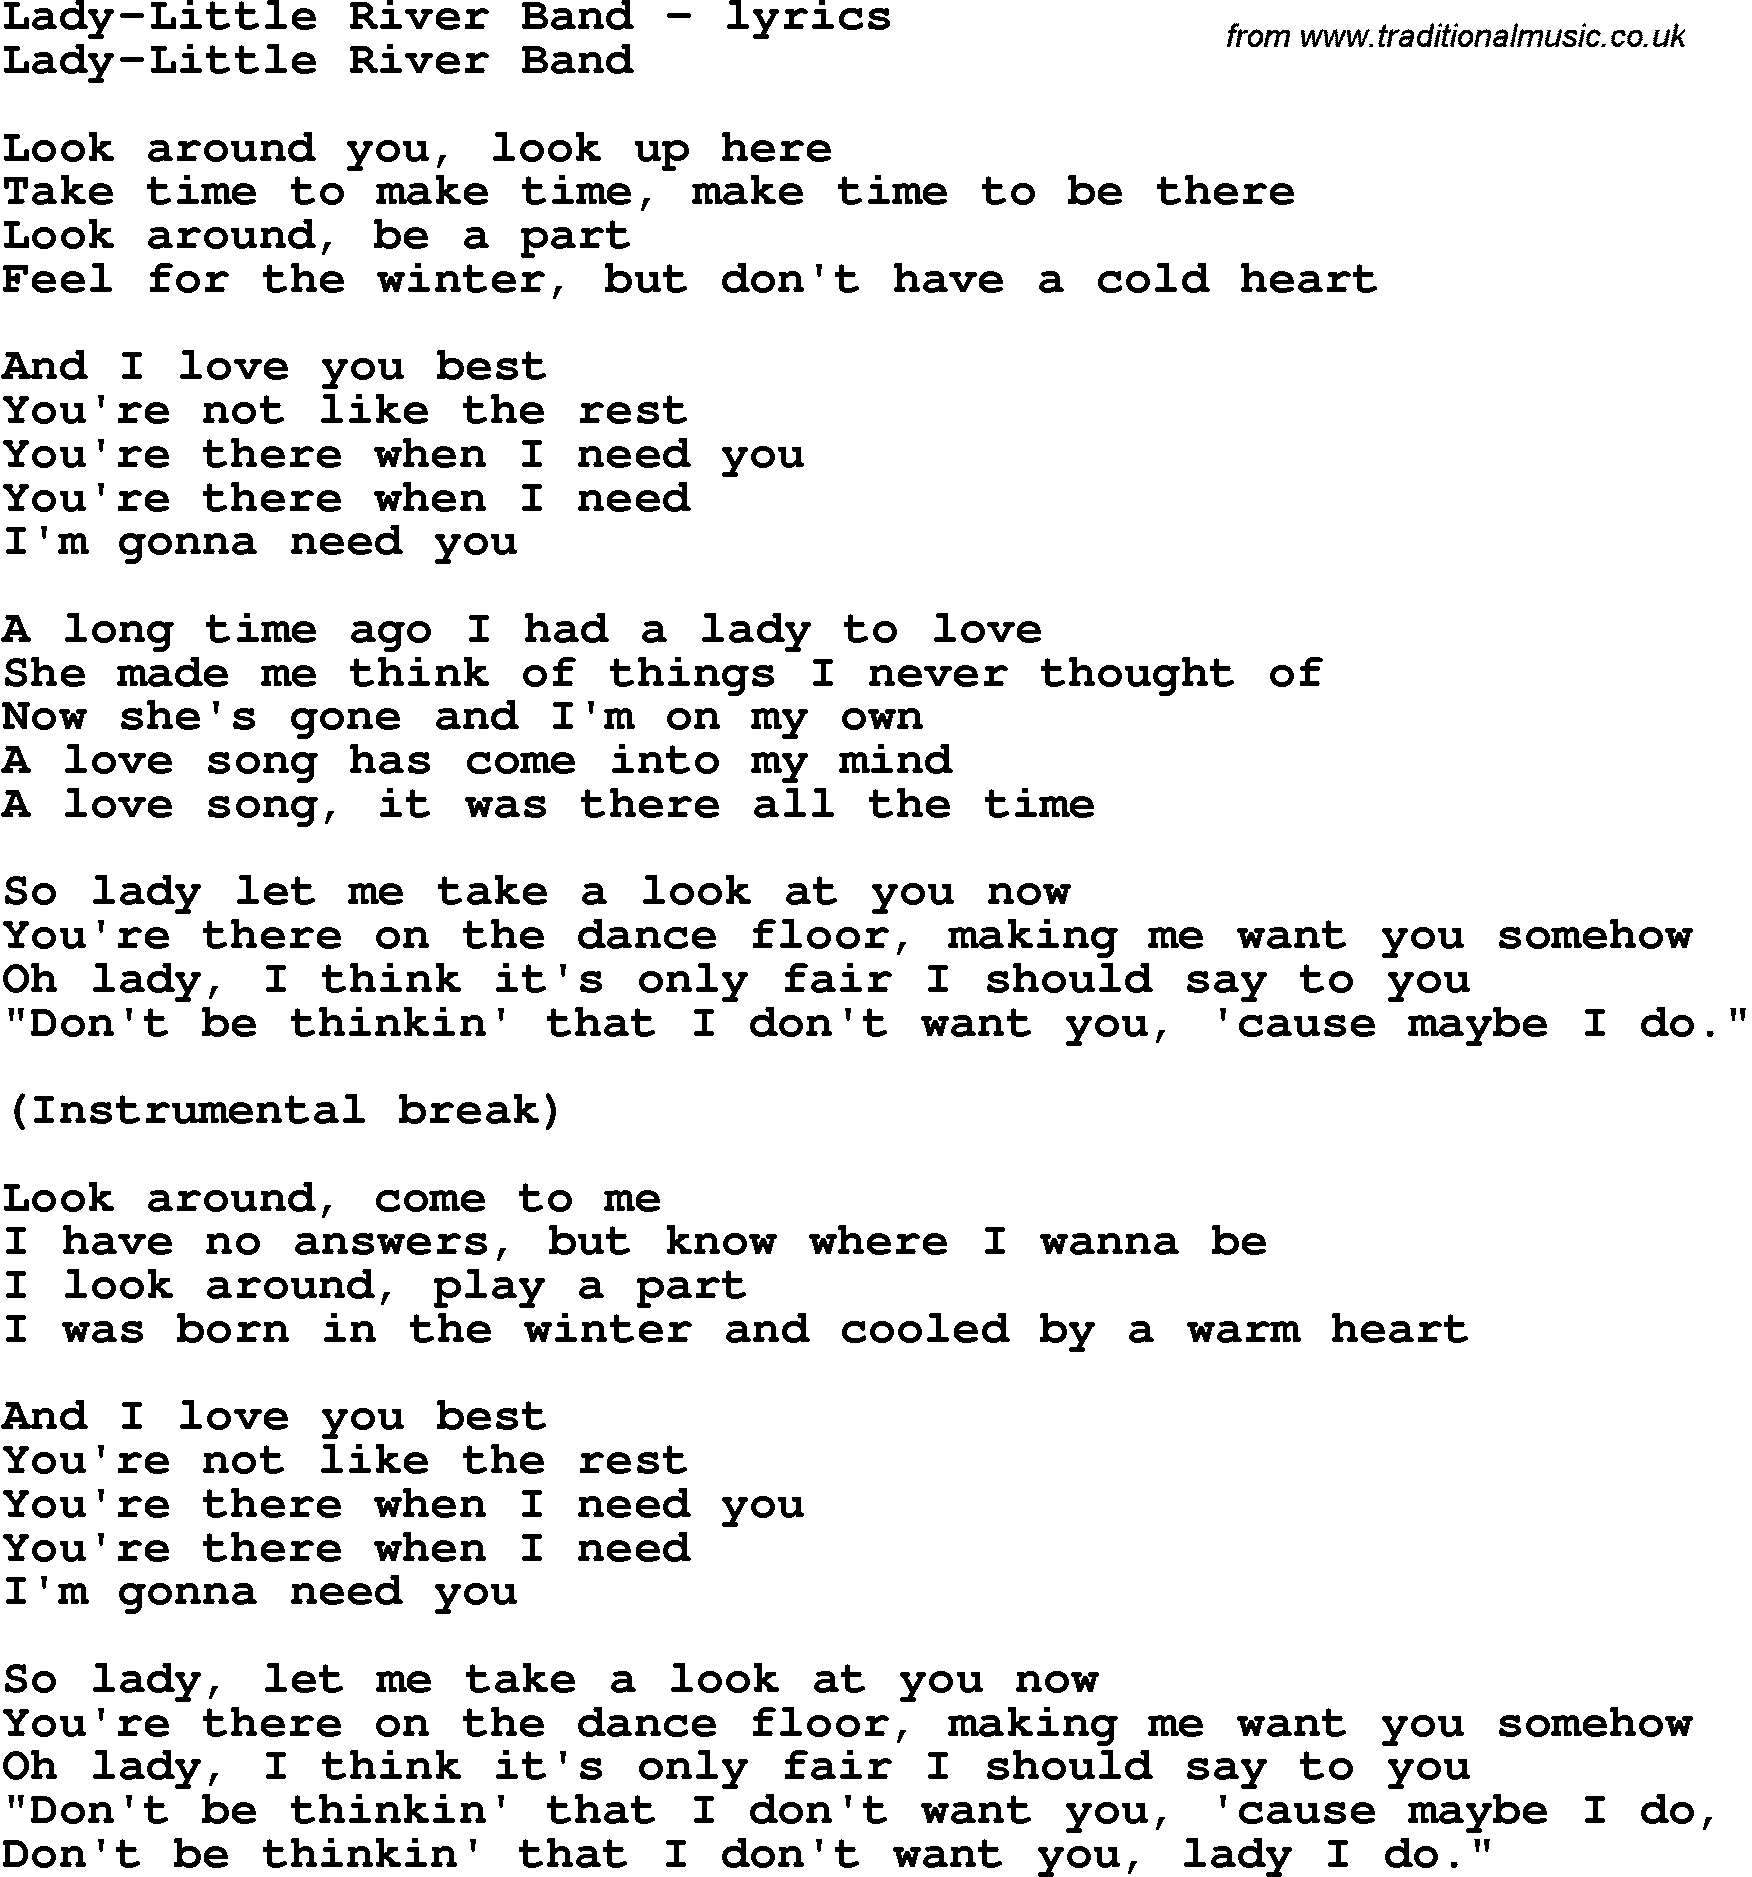 Love Song Lyrics for: Lady-Little River Band